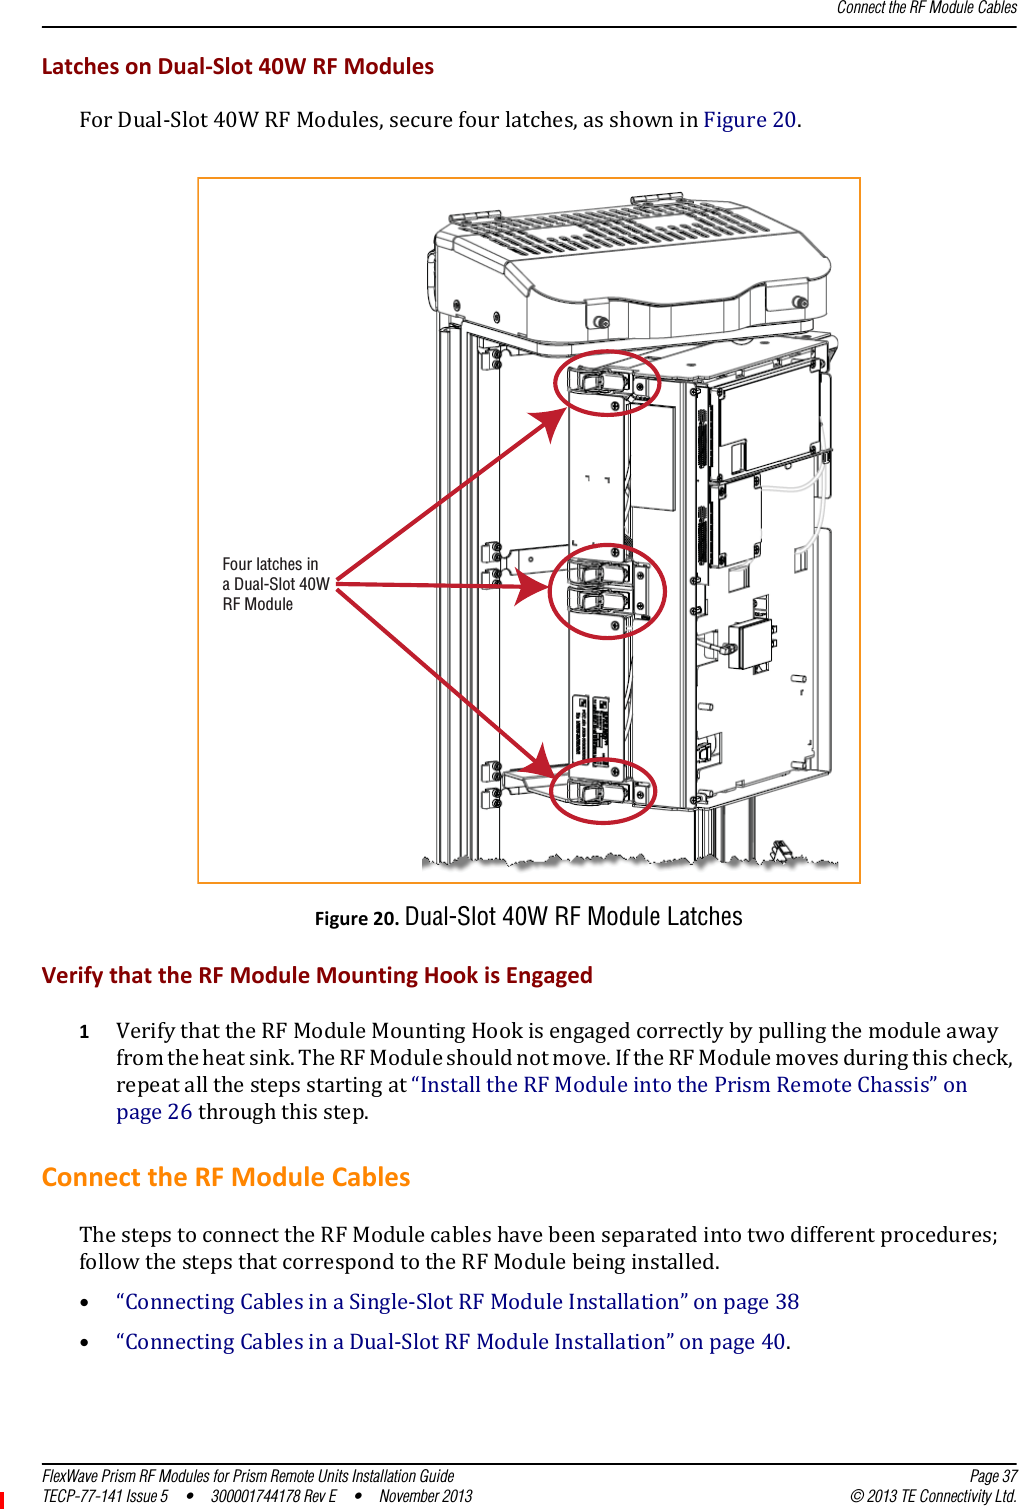 Connect the RF Module CablesFlexWave Prism RF Modules for Prism Remote Units Installation Guide Page 37TECP-77-141 Issue 5  •  300001744178 Rev E  •  November 2013 © 2013 TE Connectivity Ltd.LatchesonDual‐Slot40WRFModulesForDual‐Slot40WRFModules,securefourlatches,asshowninFigure20.Figure20.Dual-Slot 40W RF Module LatchesVerifythattheRFModuleMountingHookisEngaged1VerifythattheRFModuleMountingHookisengagedcorrectlybypullingthemoduleawayfromtheheatsink.TheRFModuleshouldnotmove.IftheRFModulemovesduringthischeck,repeatallthestepsstartingat“InstalltheRFModuleintothePrismRemoteChassis”onpage26throughthisstep.ConnecttheRFModuleCablesThestepstoconnecttheRFModulecableshavebeenseparatedintotwodifferentprocedures;followthestepsthatcorrespondtotheRFModulebeinginstalled.•“ConnectingCablesinaSingle‐SlotRFModuleInstallation”onpage38•“ConnectingCablesinaDual‐SlotRFModuleInstallation”onpage40.Four latches ina Dual-Slot 40WRF Module